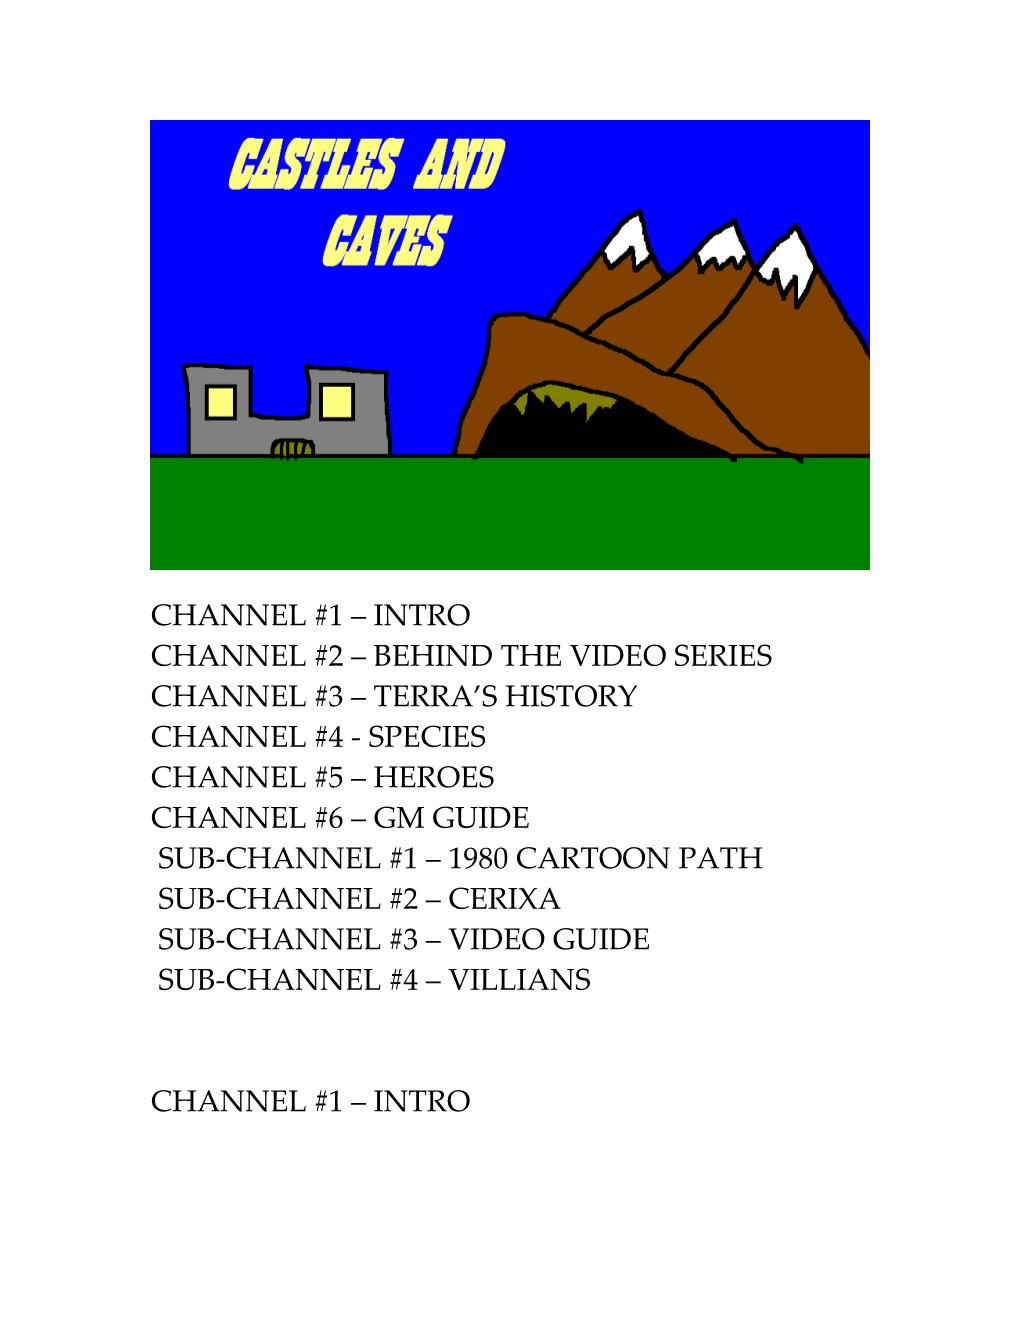 Channel #1 Intro Channel #2 Behind the Video Series